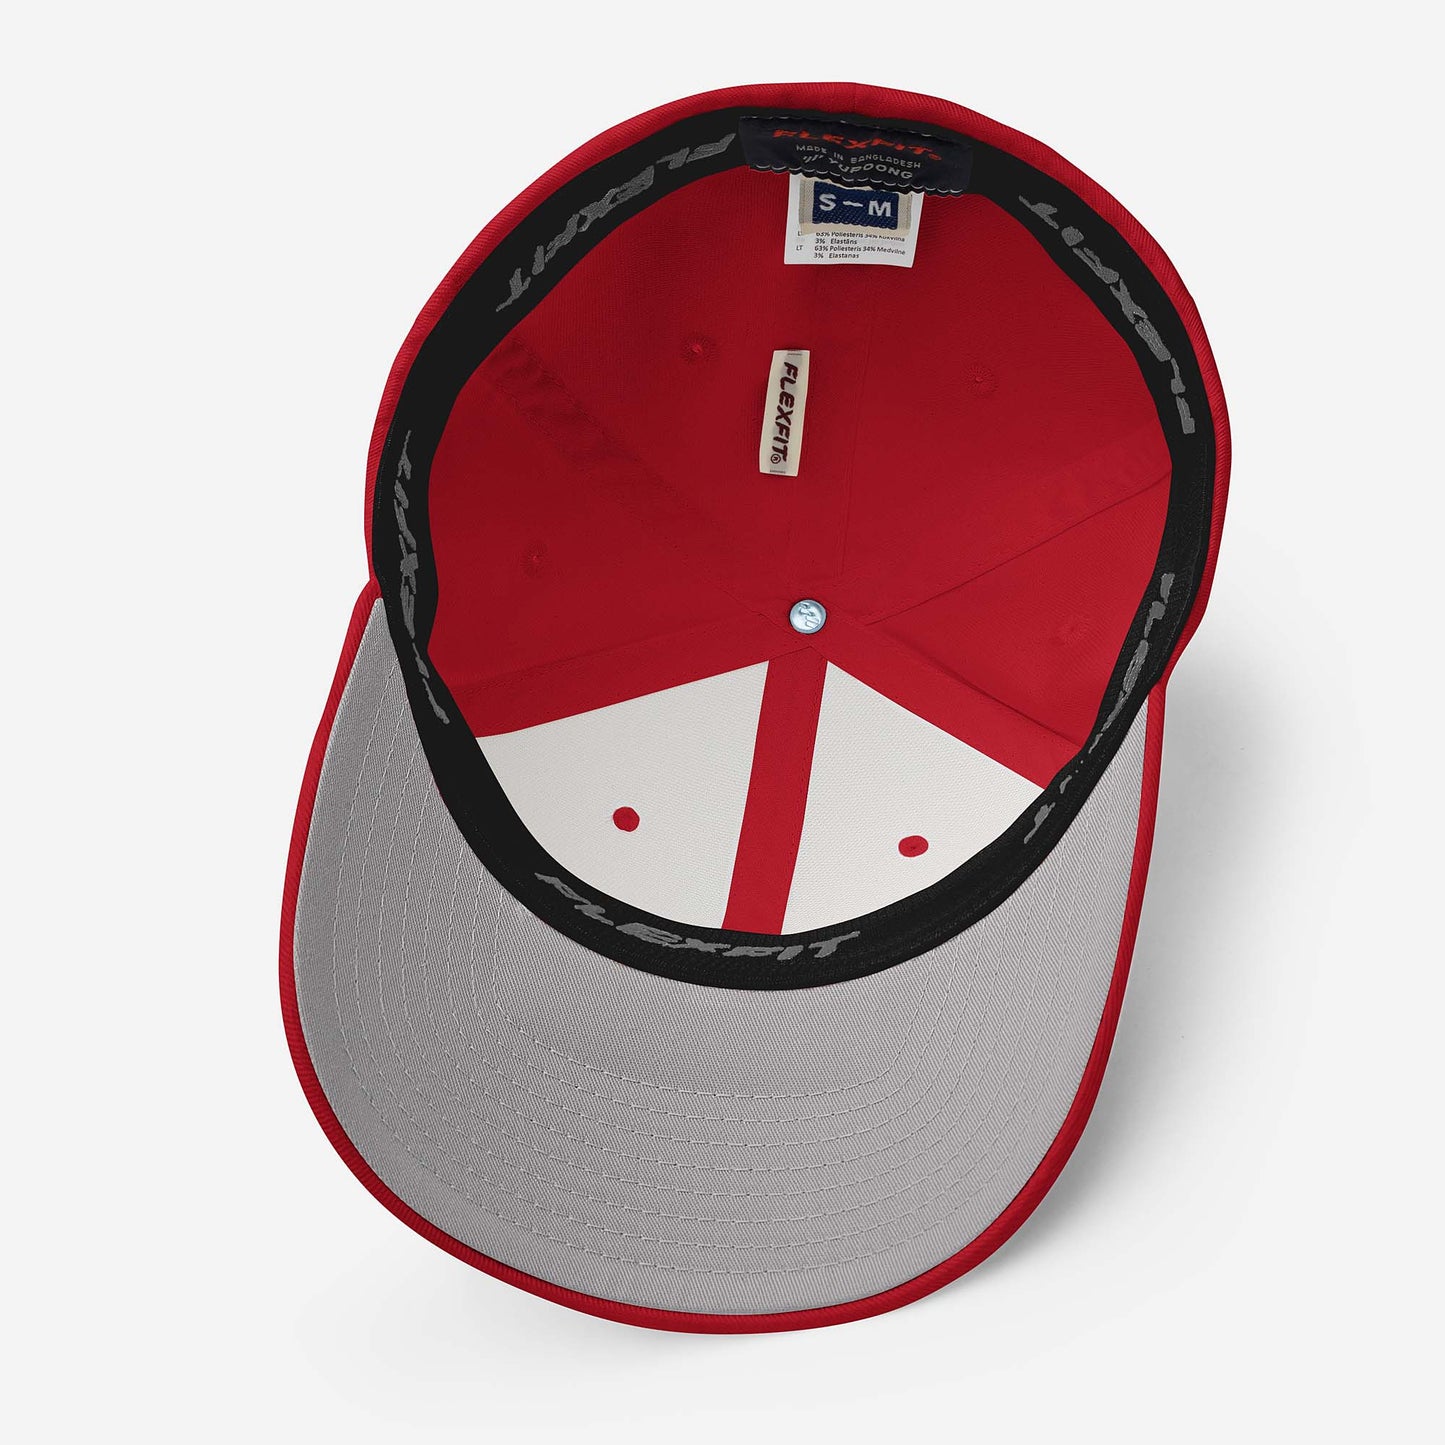 Red fitted baseball hat with white embroidery front and back